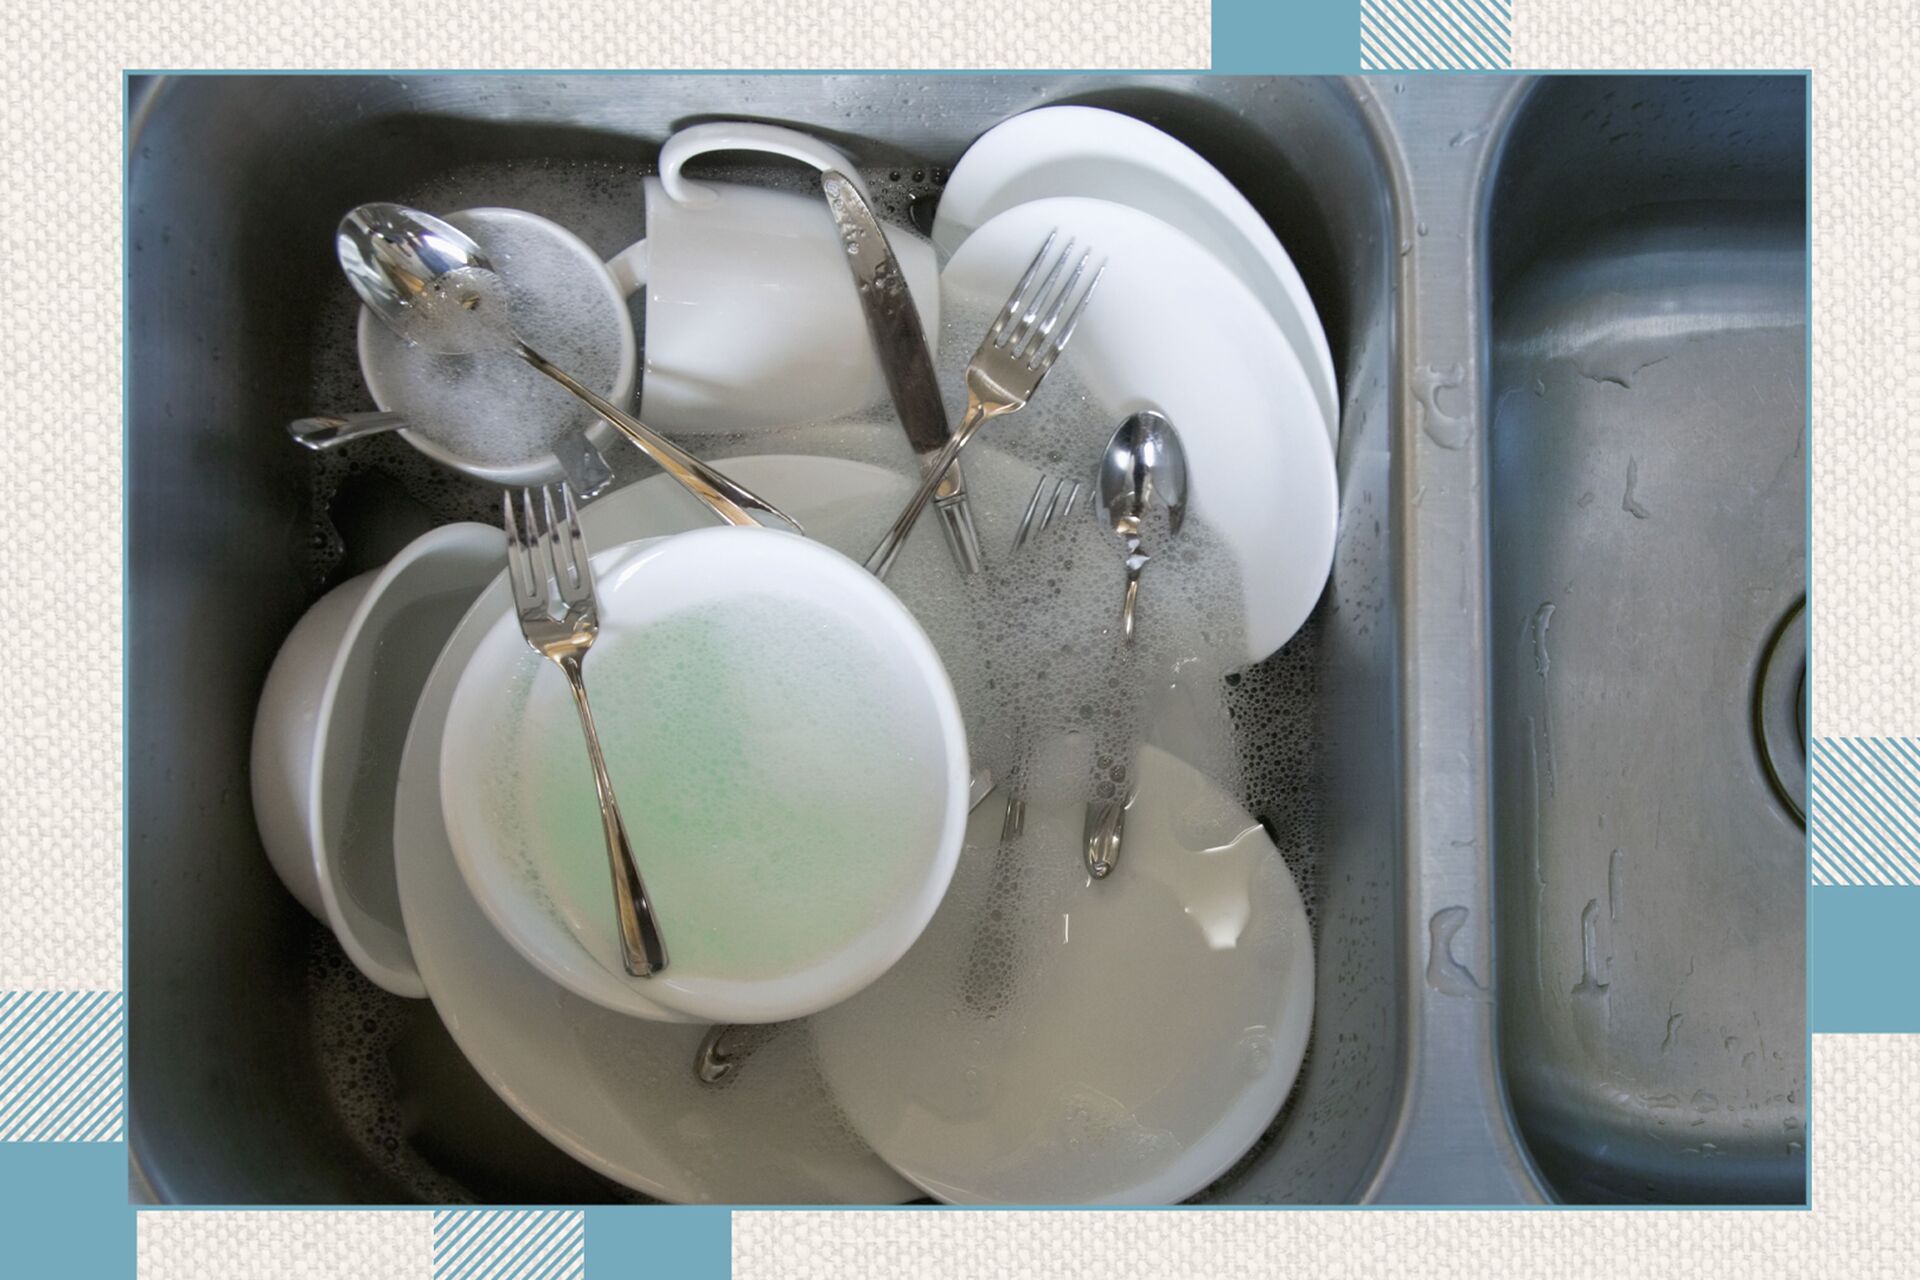 How To Wash Tableware In A Three-Compartment Sink